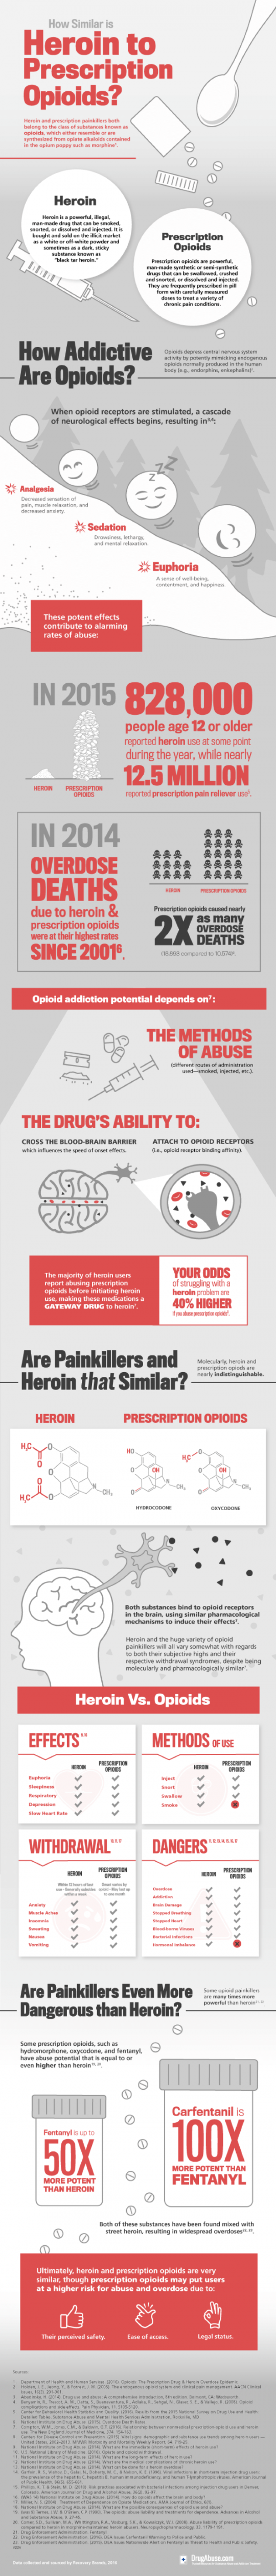 How Similar is Heroin to Prescription Opioids?